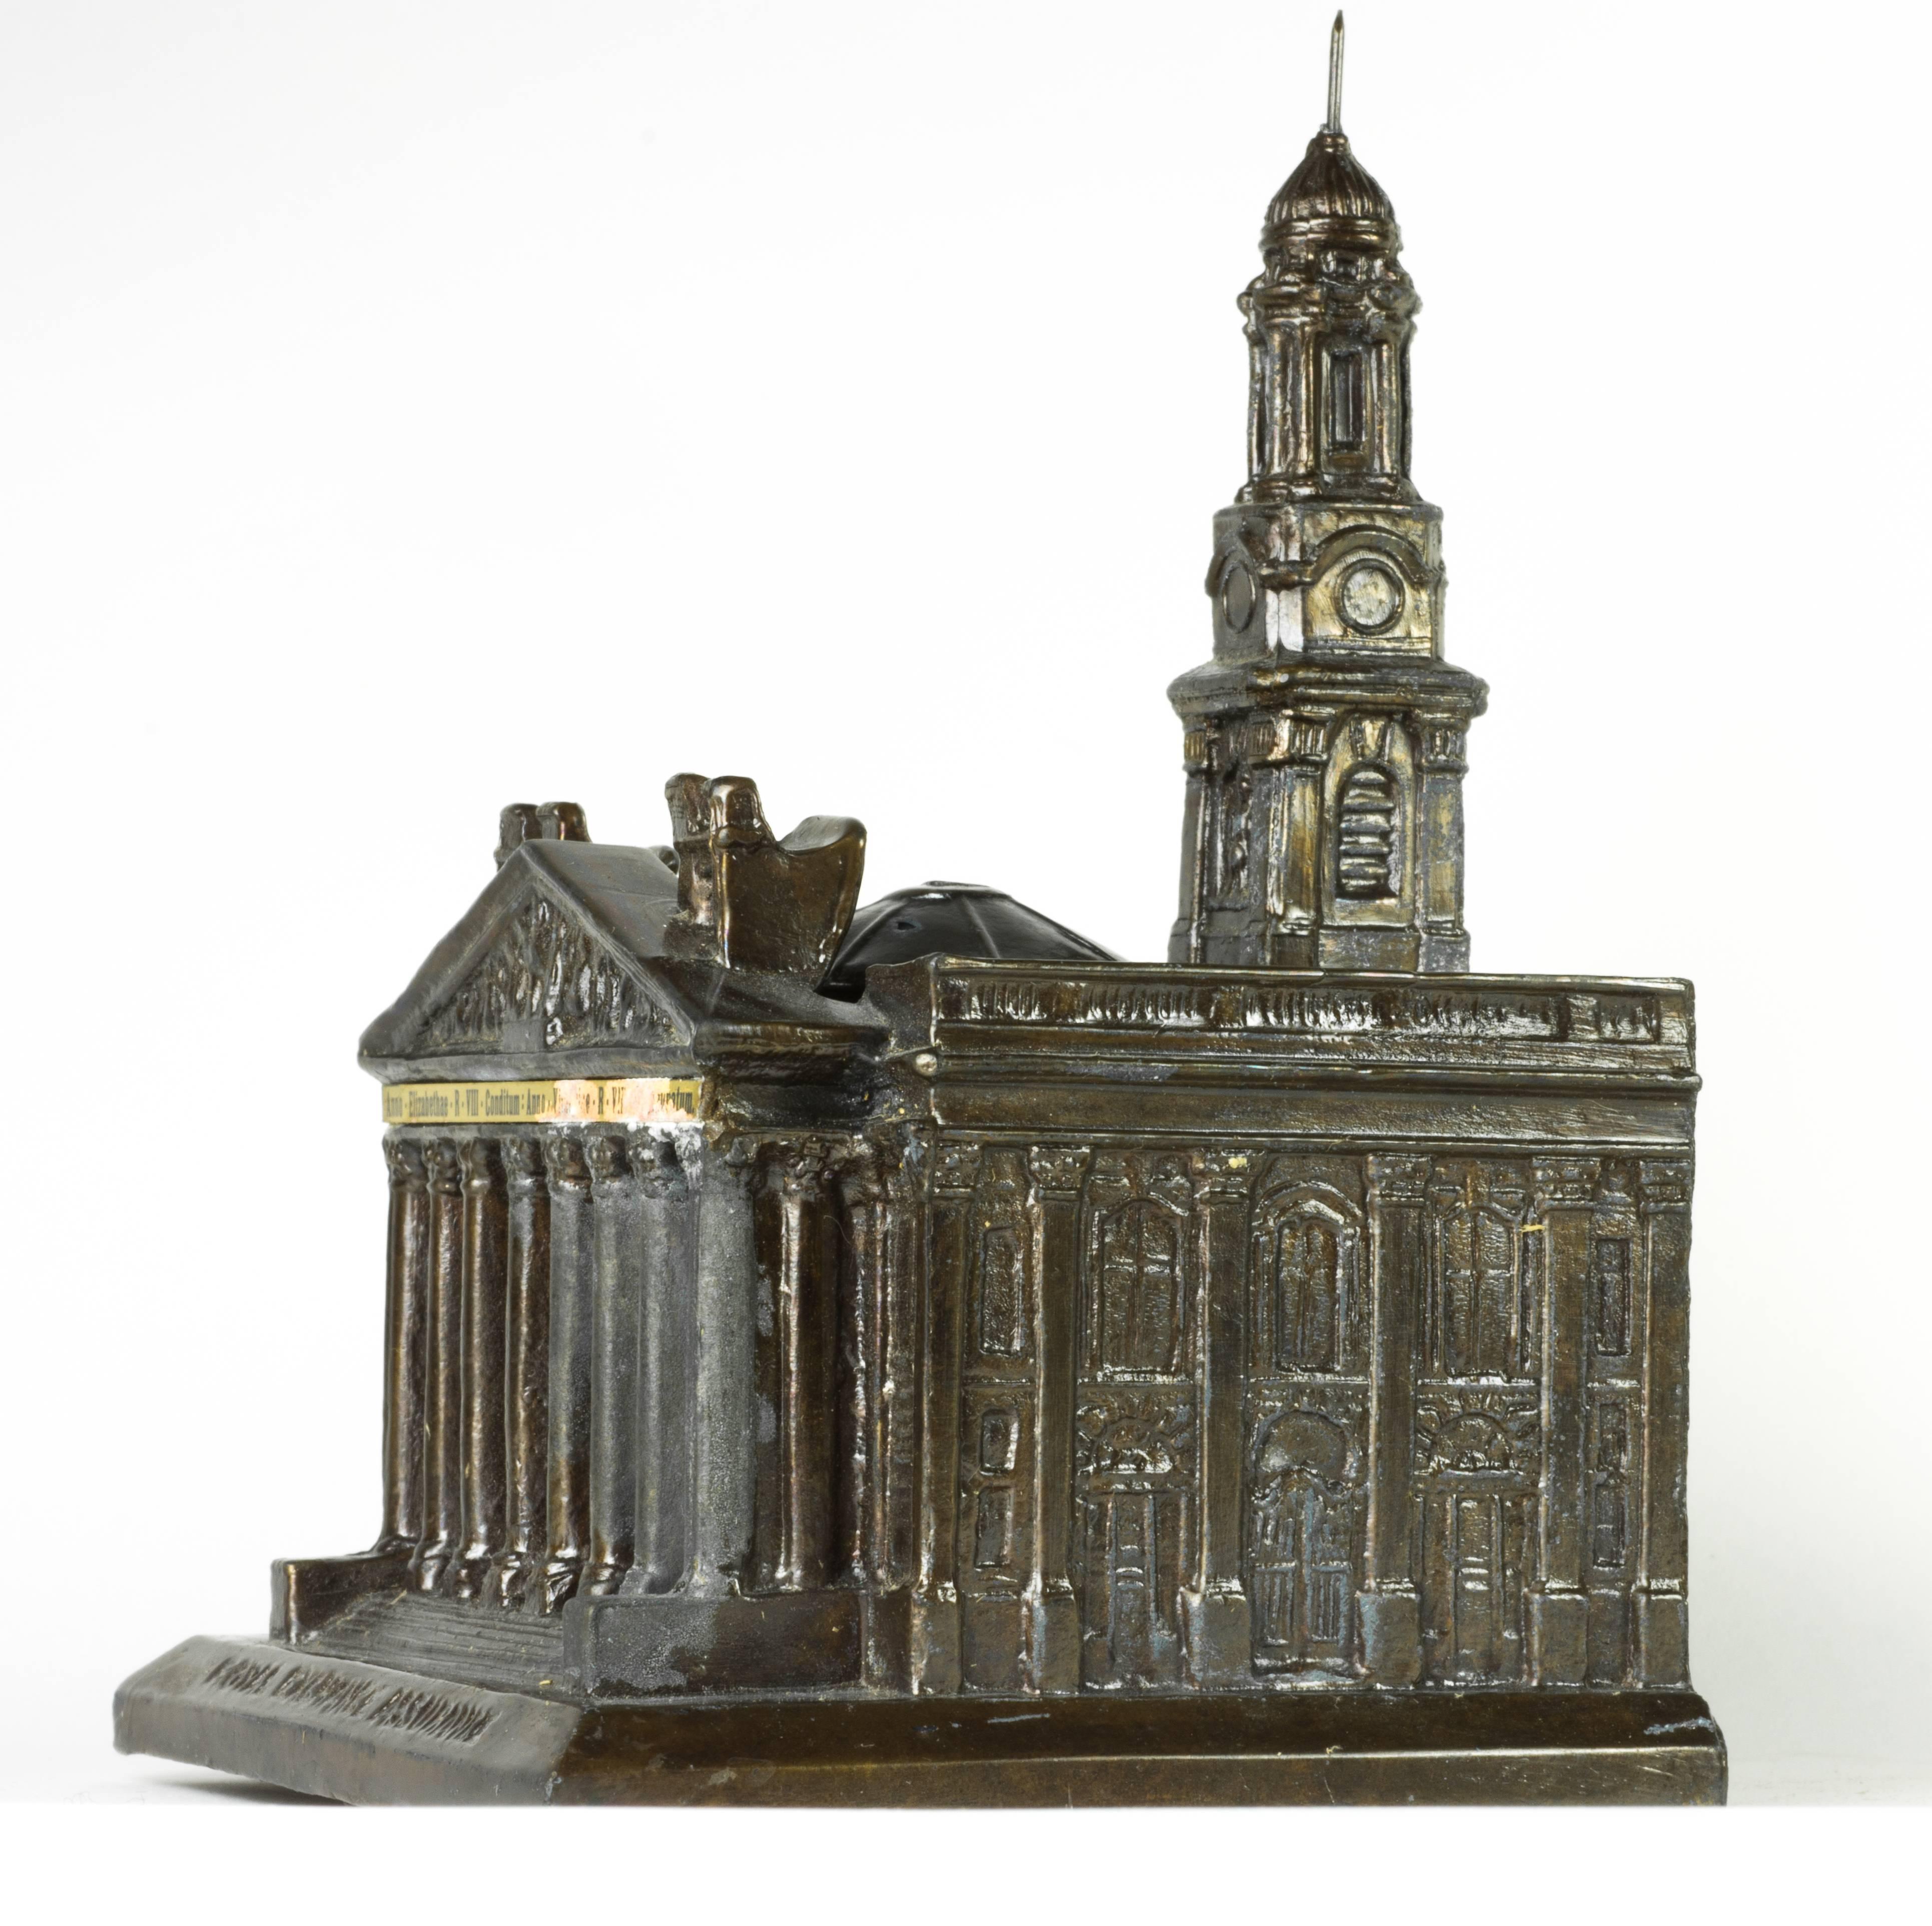 English Royal Exchange Assurance, London, 1930s Souvenir Architectural Inkwell For Sale